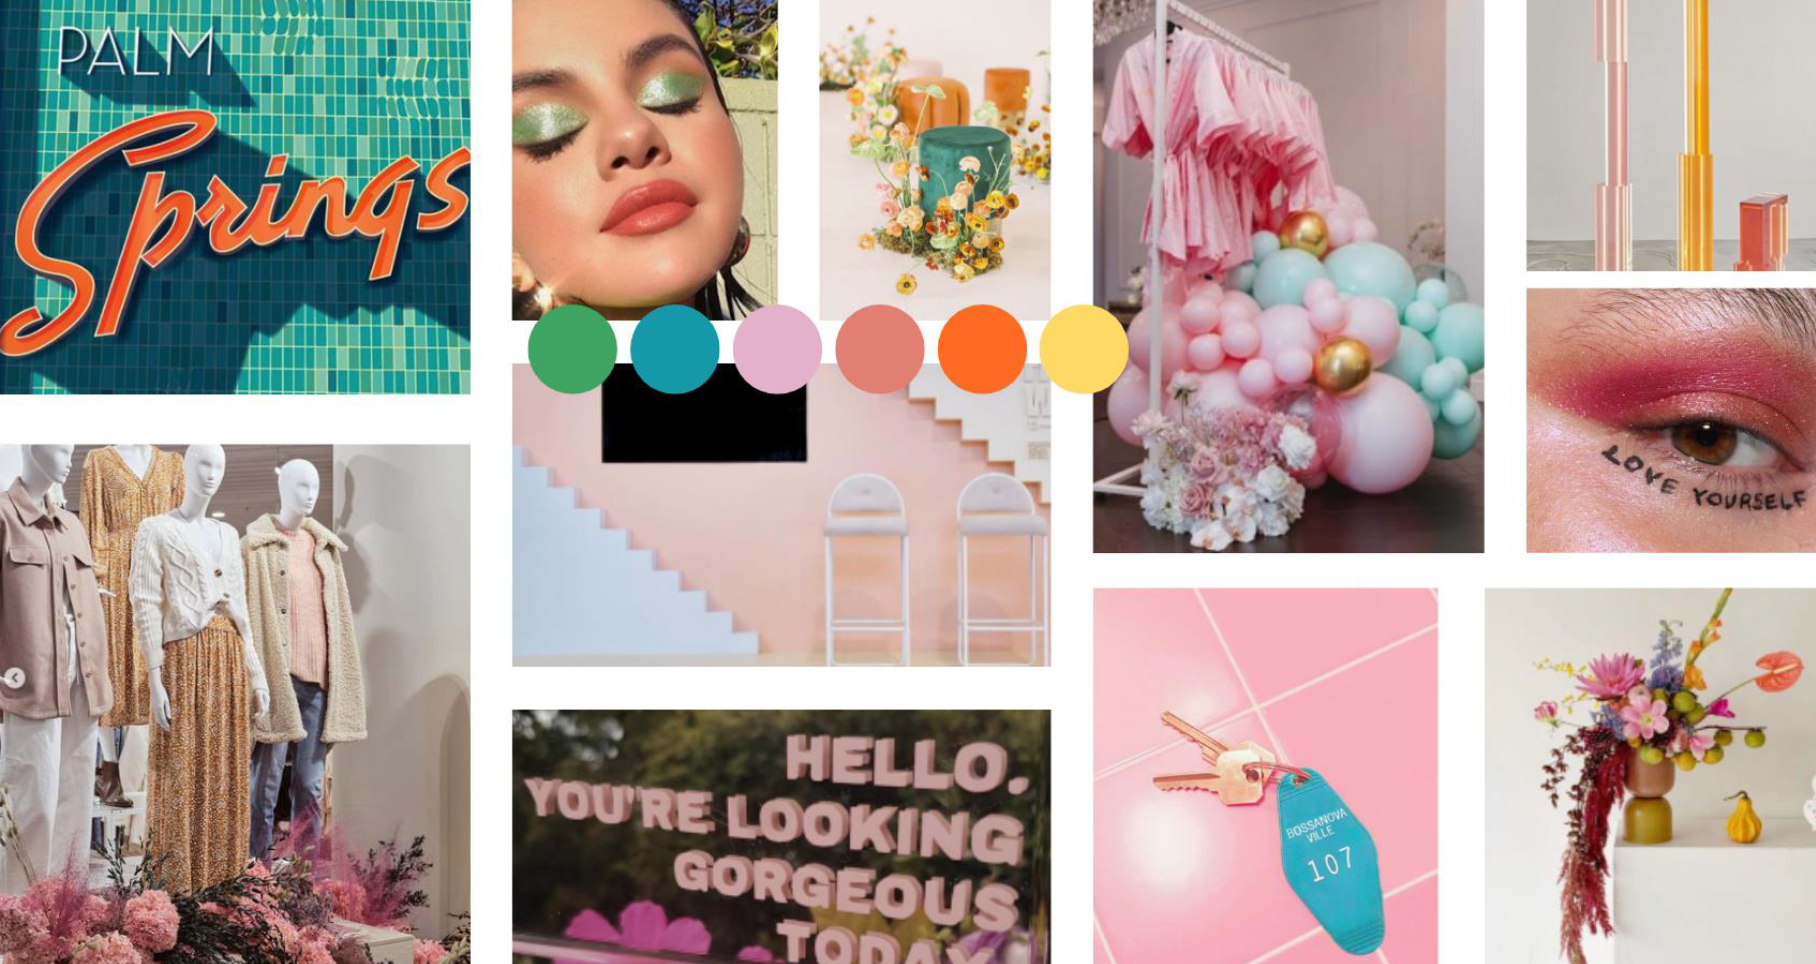 Stylist mood board showcasing Palm Springs vibes with bright rainbow palette; grass green, turquoise blue, pink, orange and sunshine yellow.